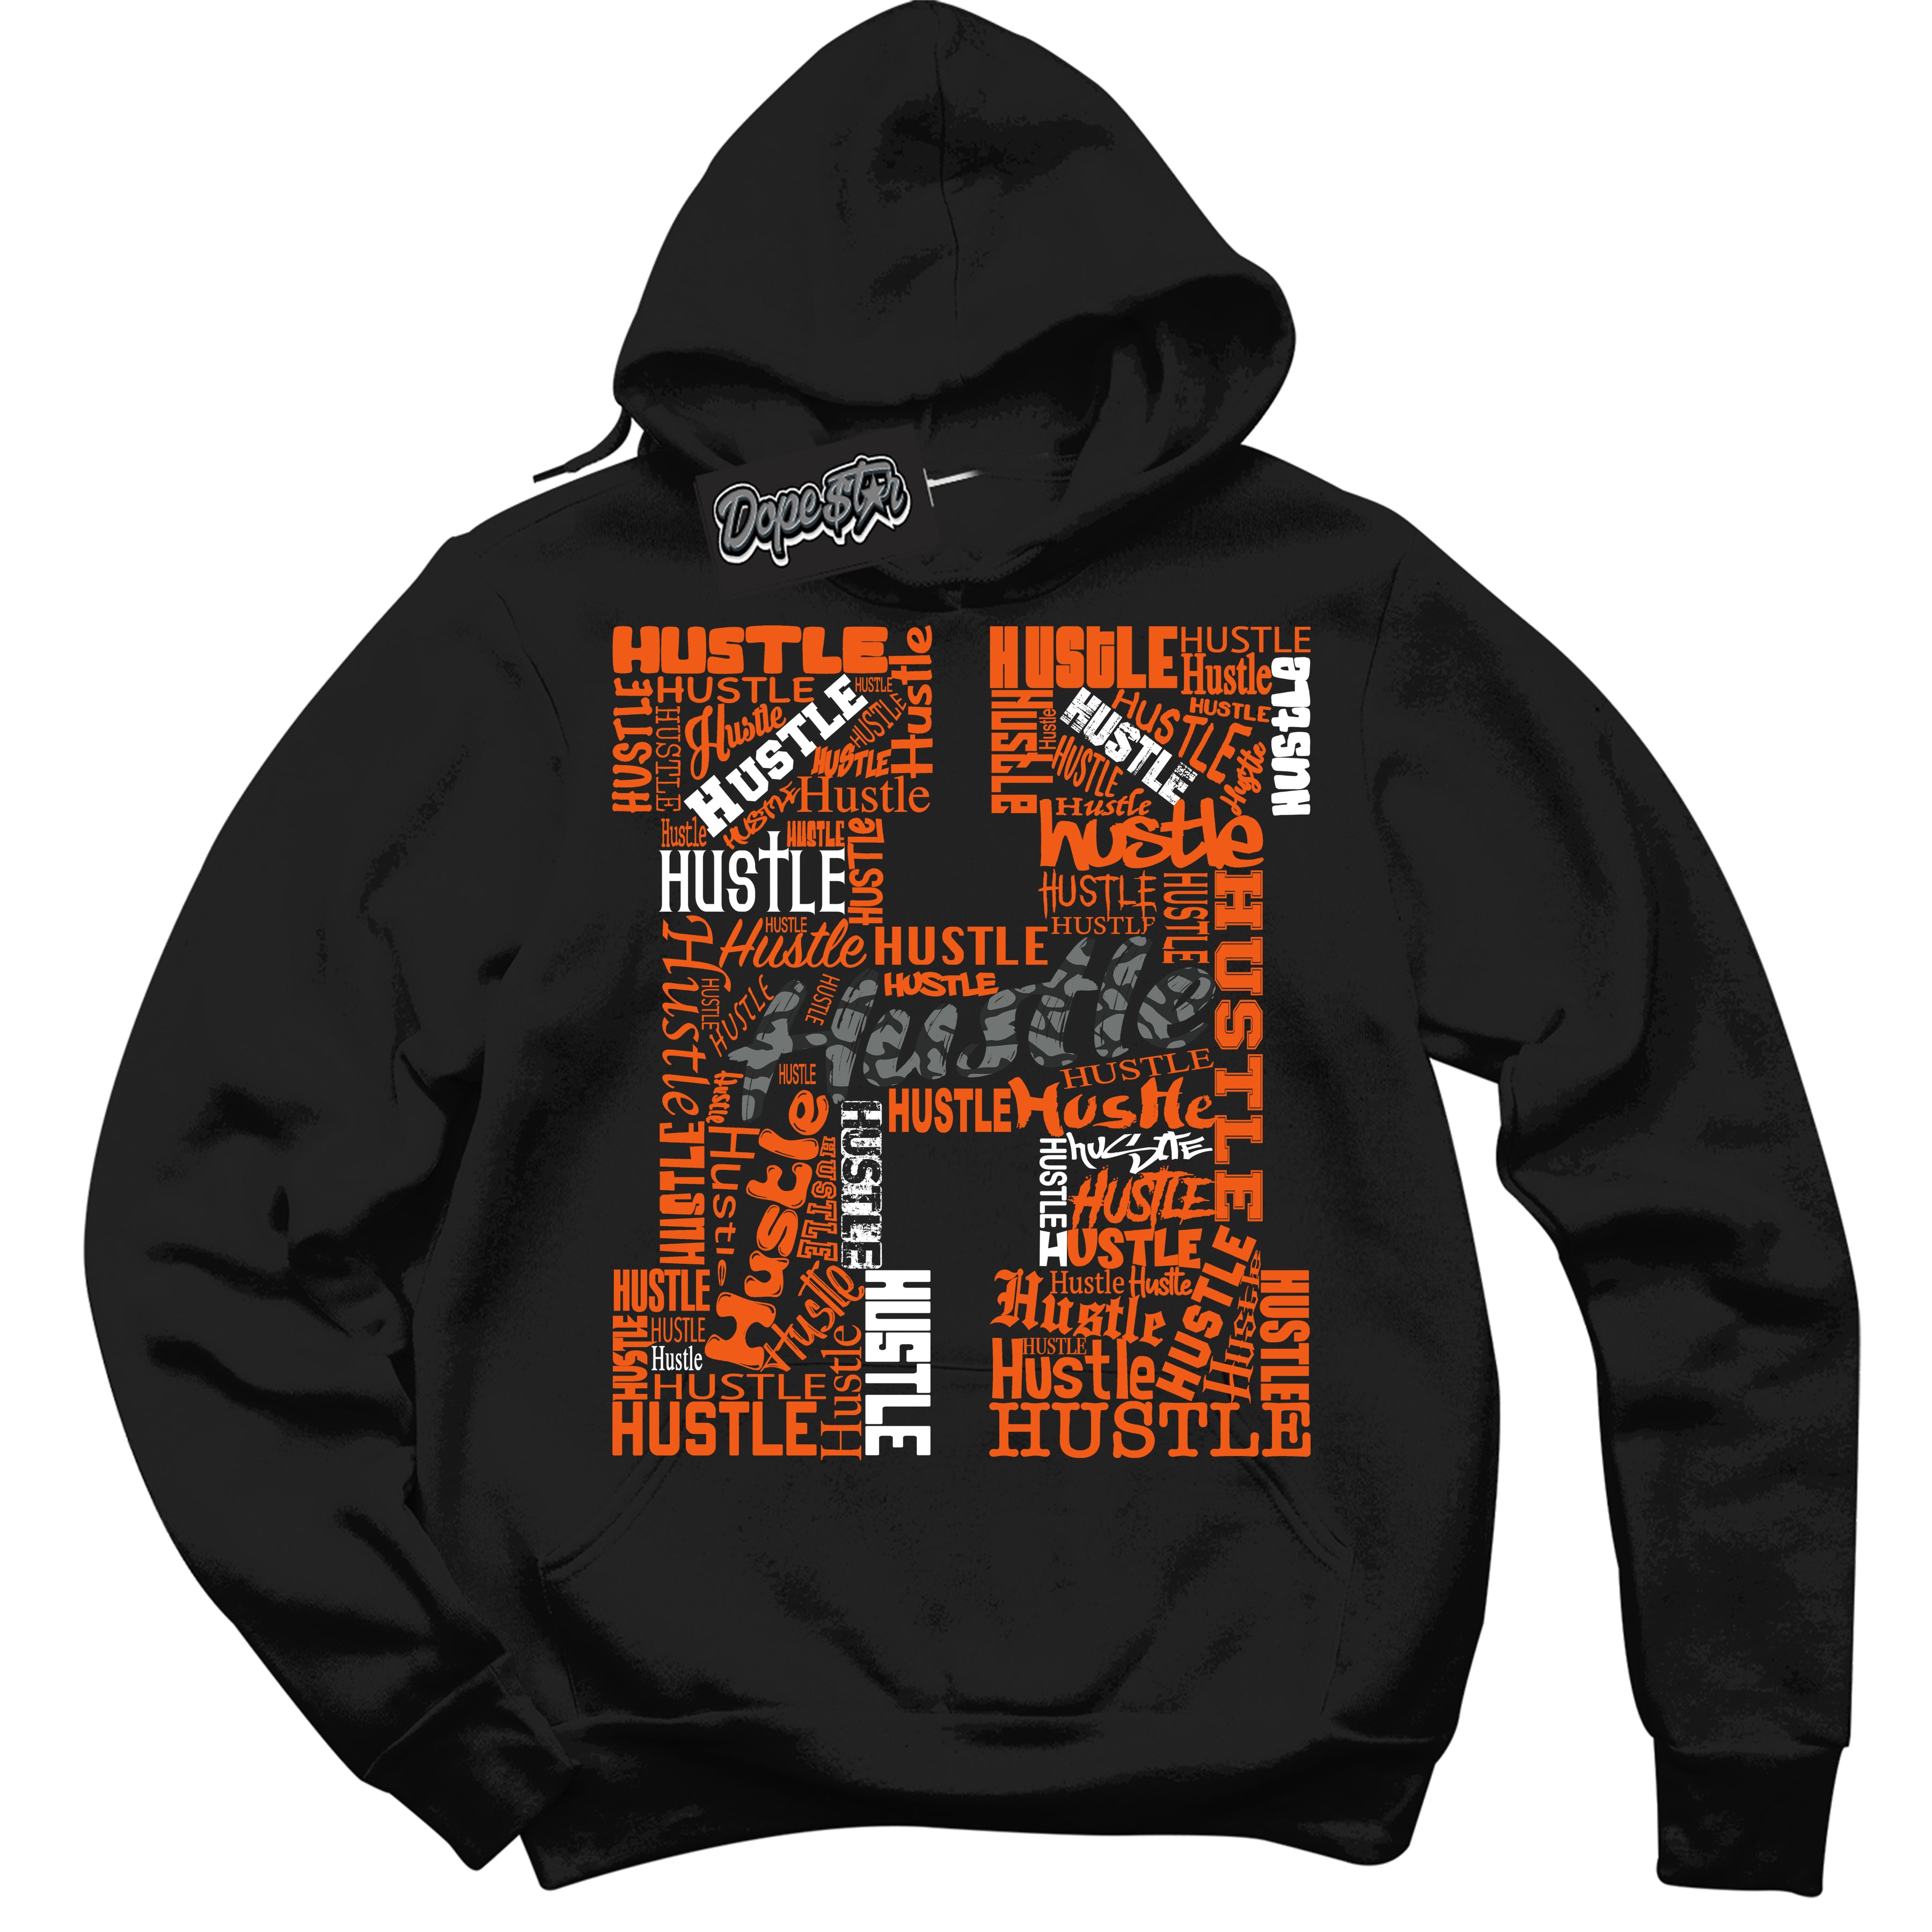 Cool Black Graphic DopeStar Hoodie with “  Hustle H  “ print, that perfectly matches Fear Pack 3s sneakers